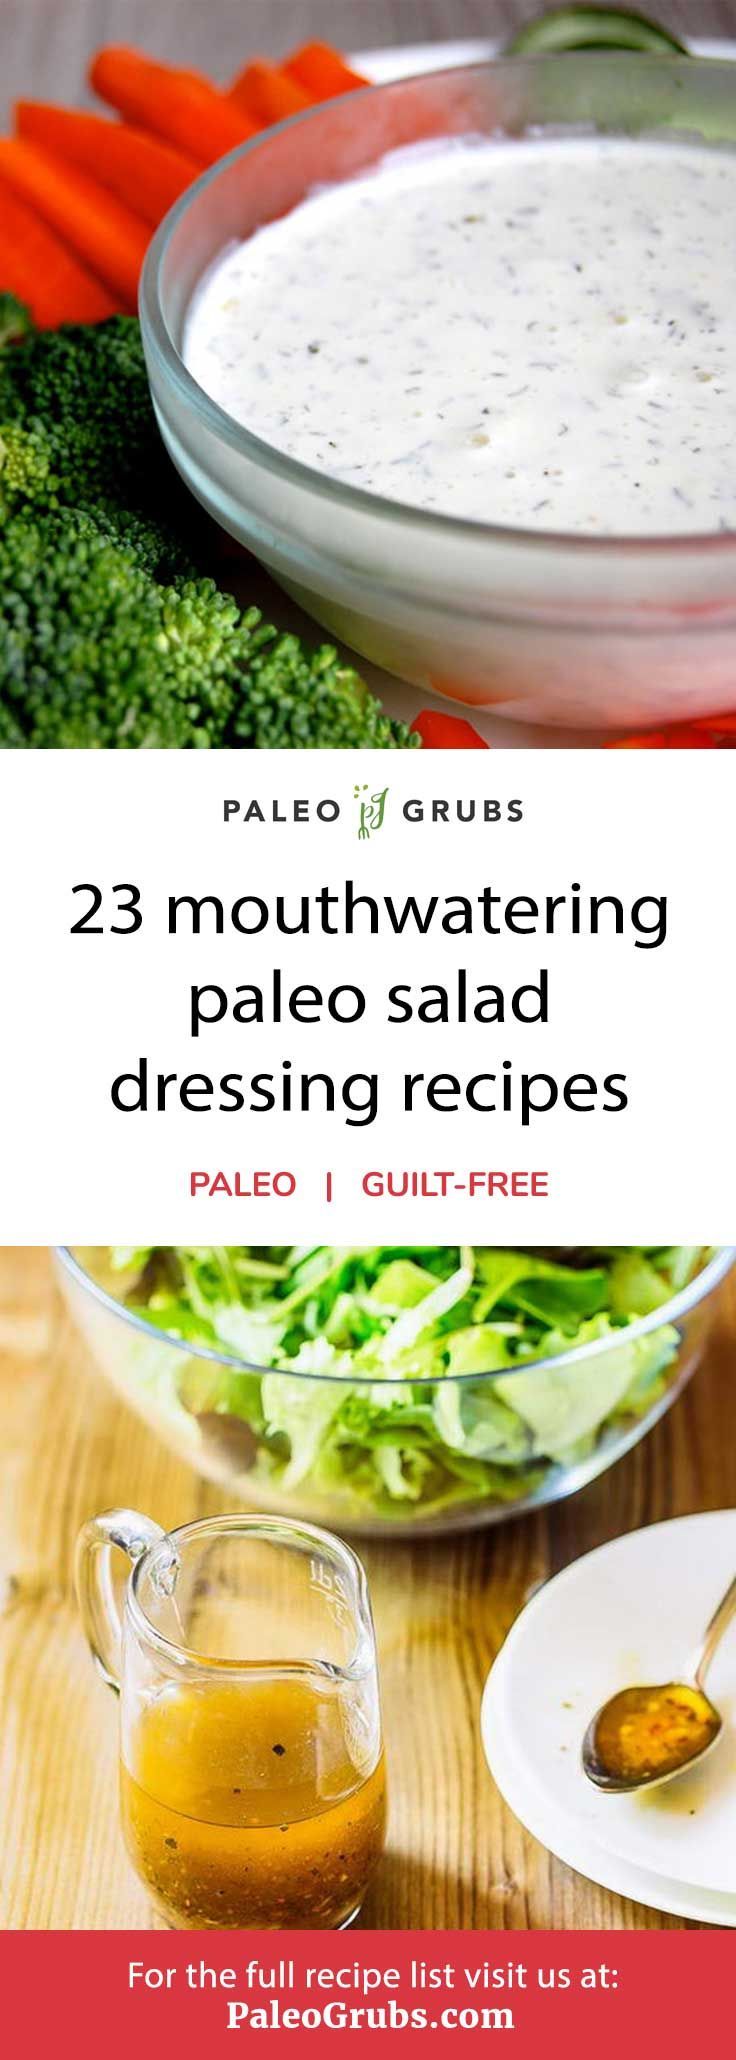 23 Mouthwatering Paleo Salad Dressing Recipes -   15 healthy recipes Salad dressing ideas